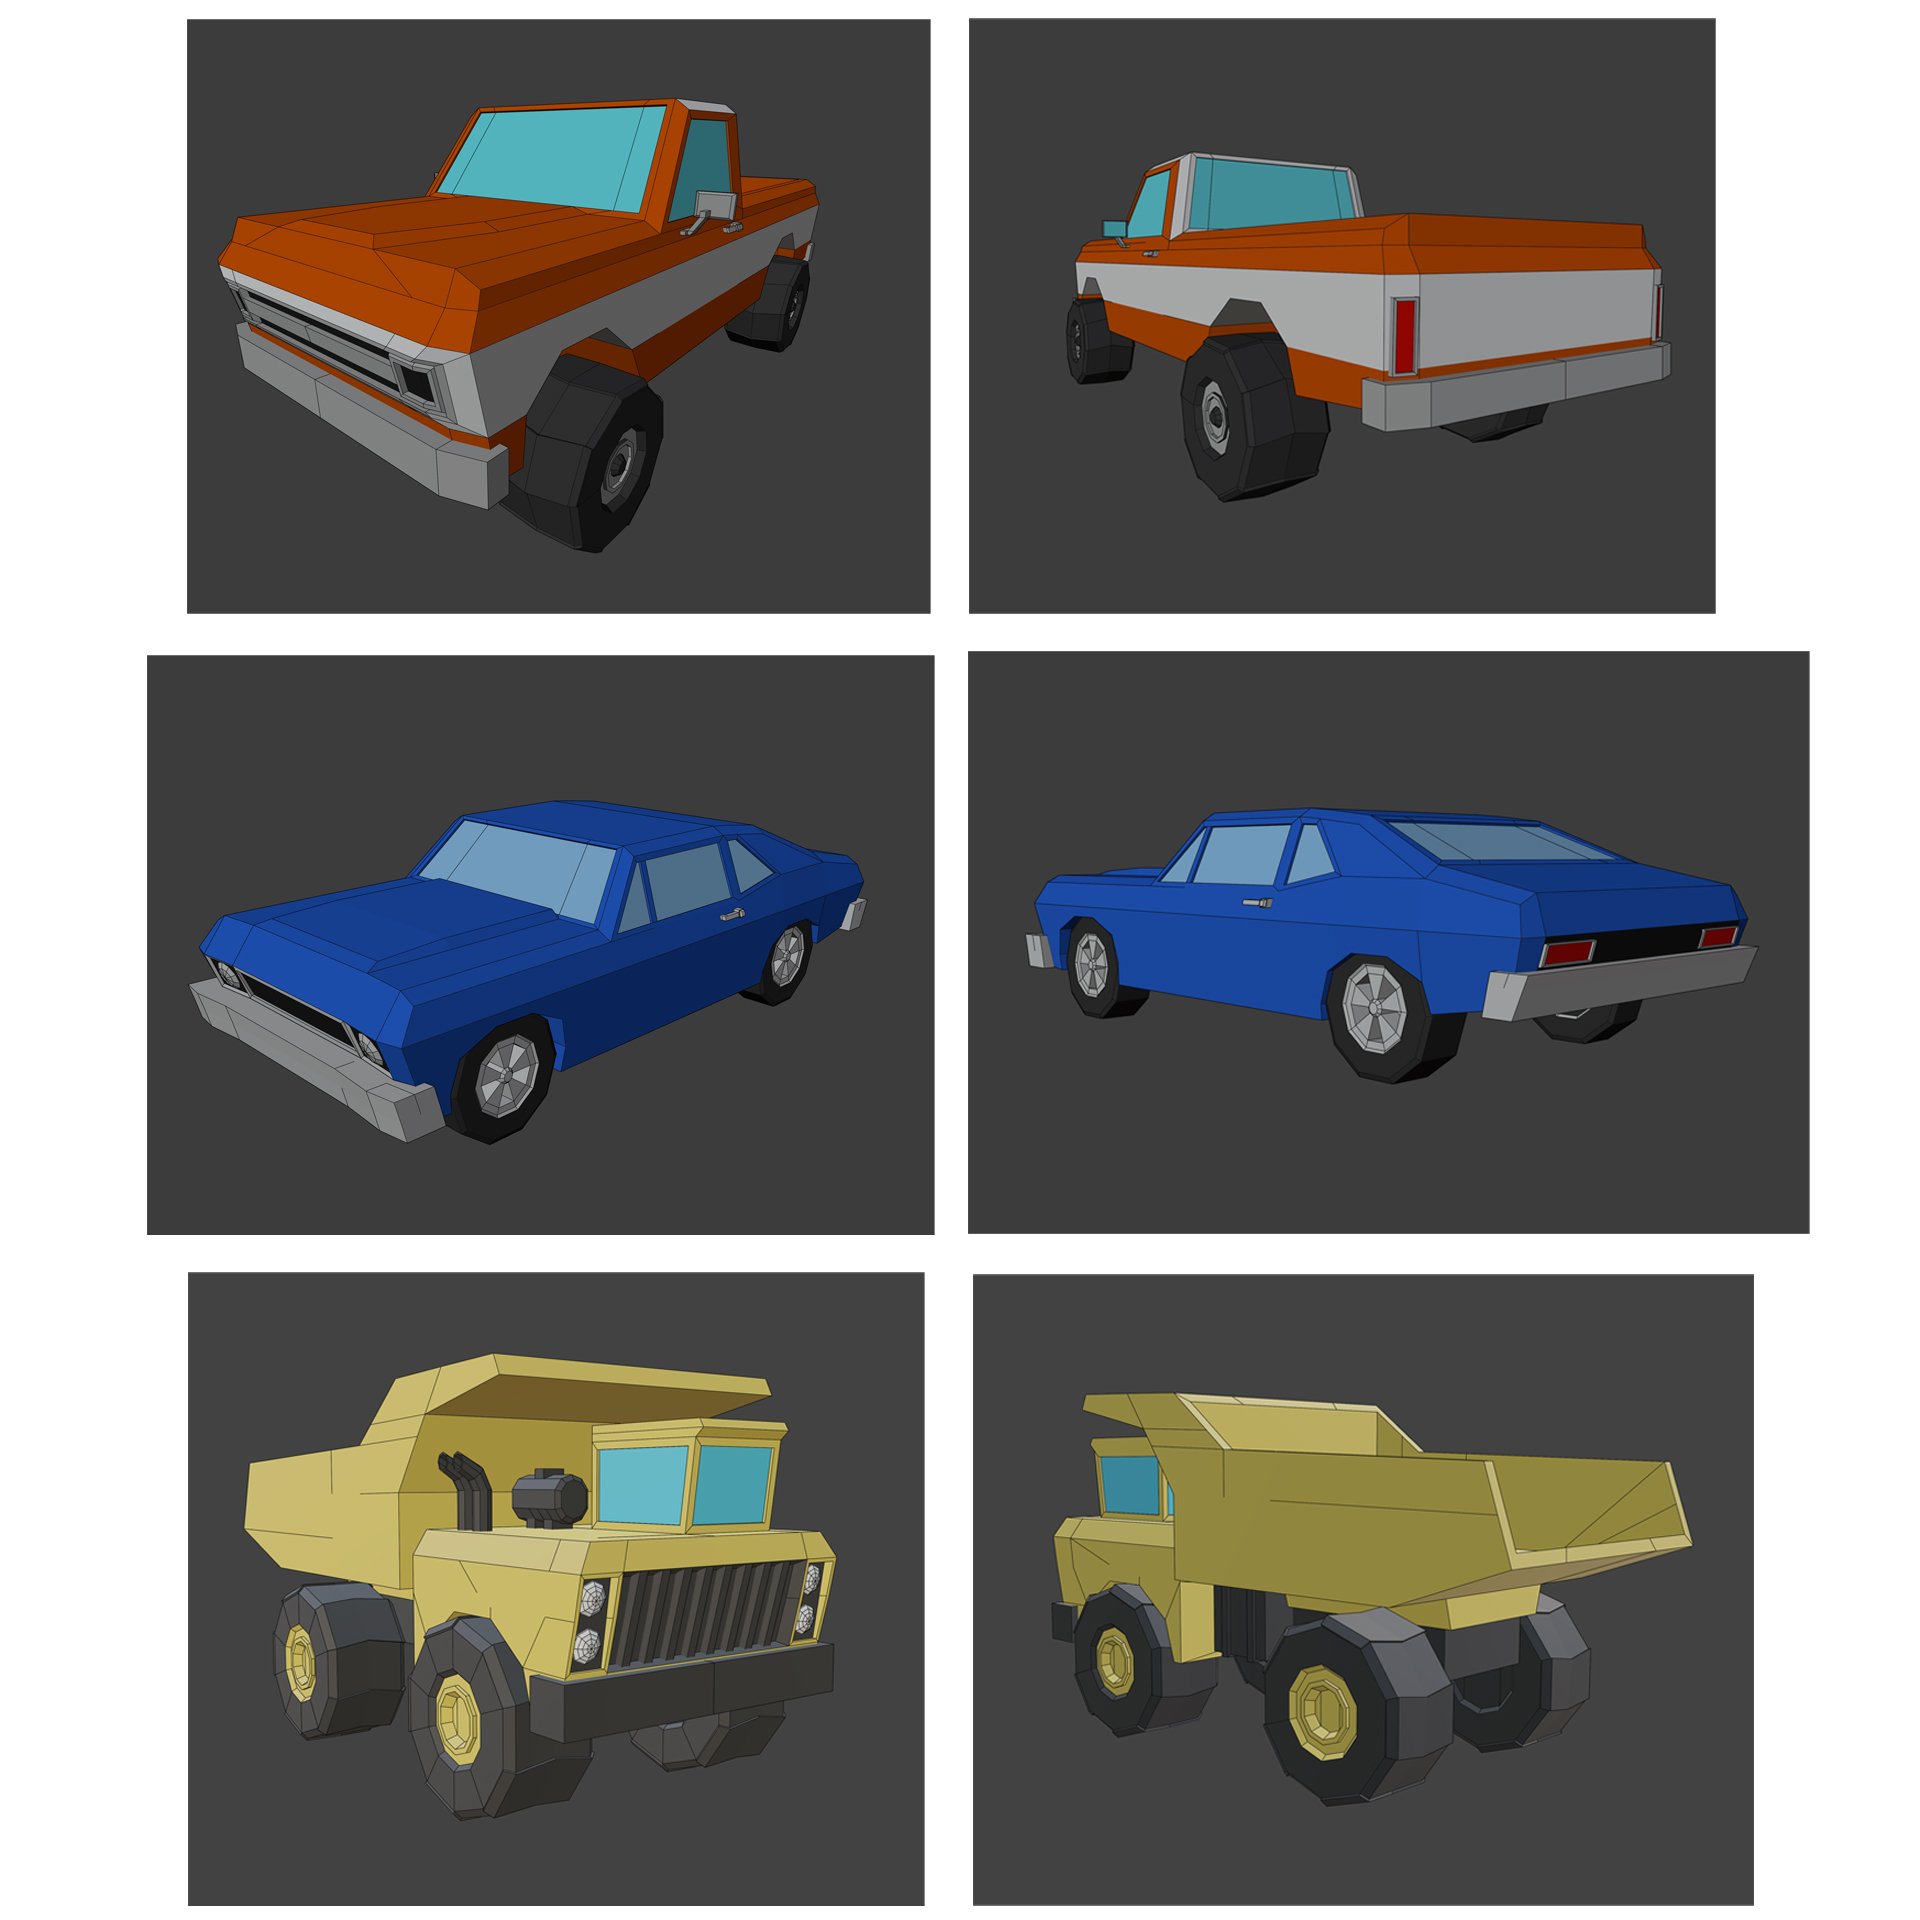 Low Poly Vehicle Models.